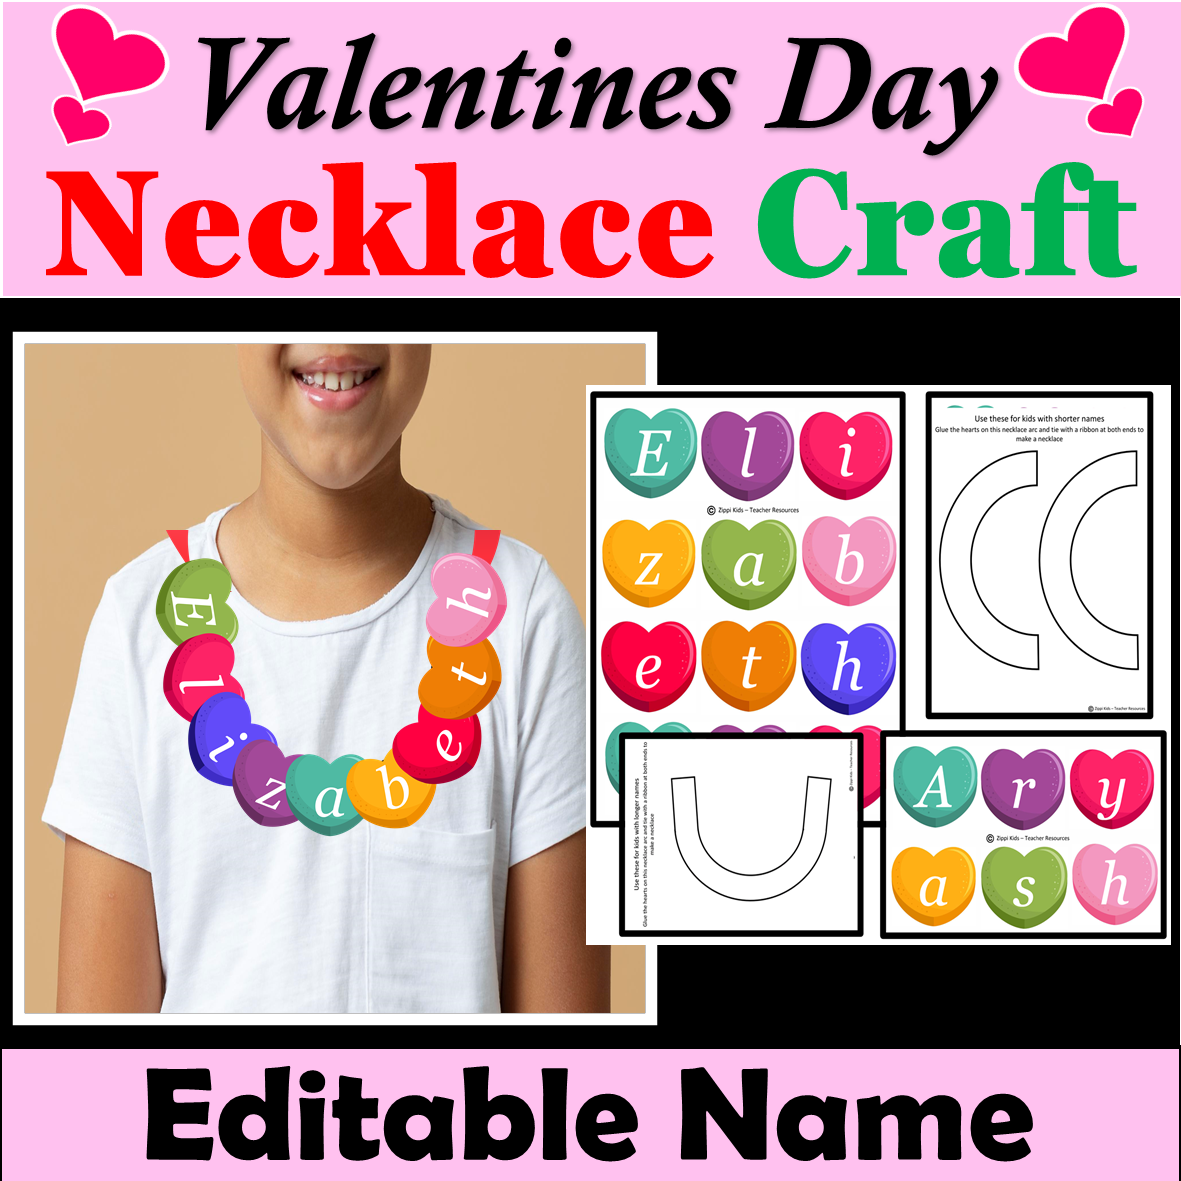 Valentines Day Name Craft, Heart Necklace Craft, Valentines Day Activities